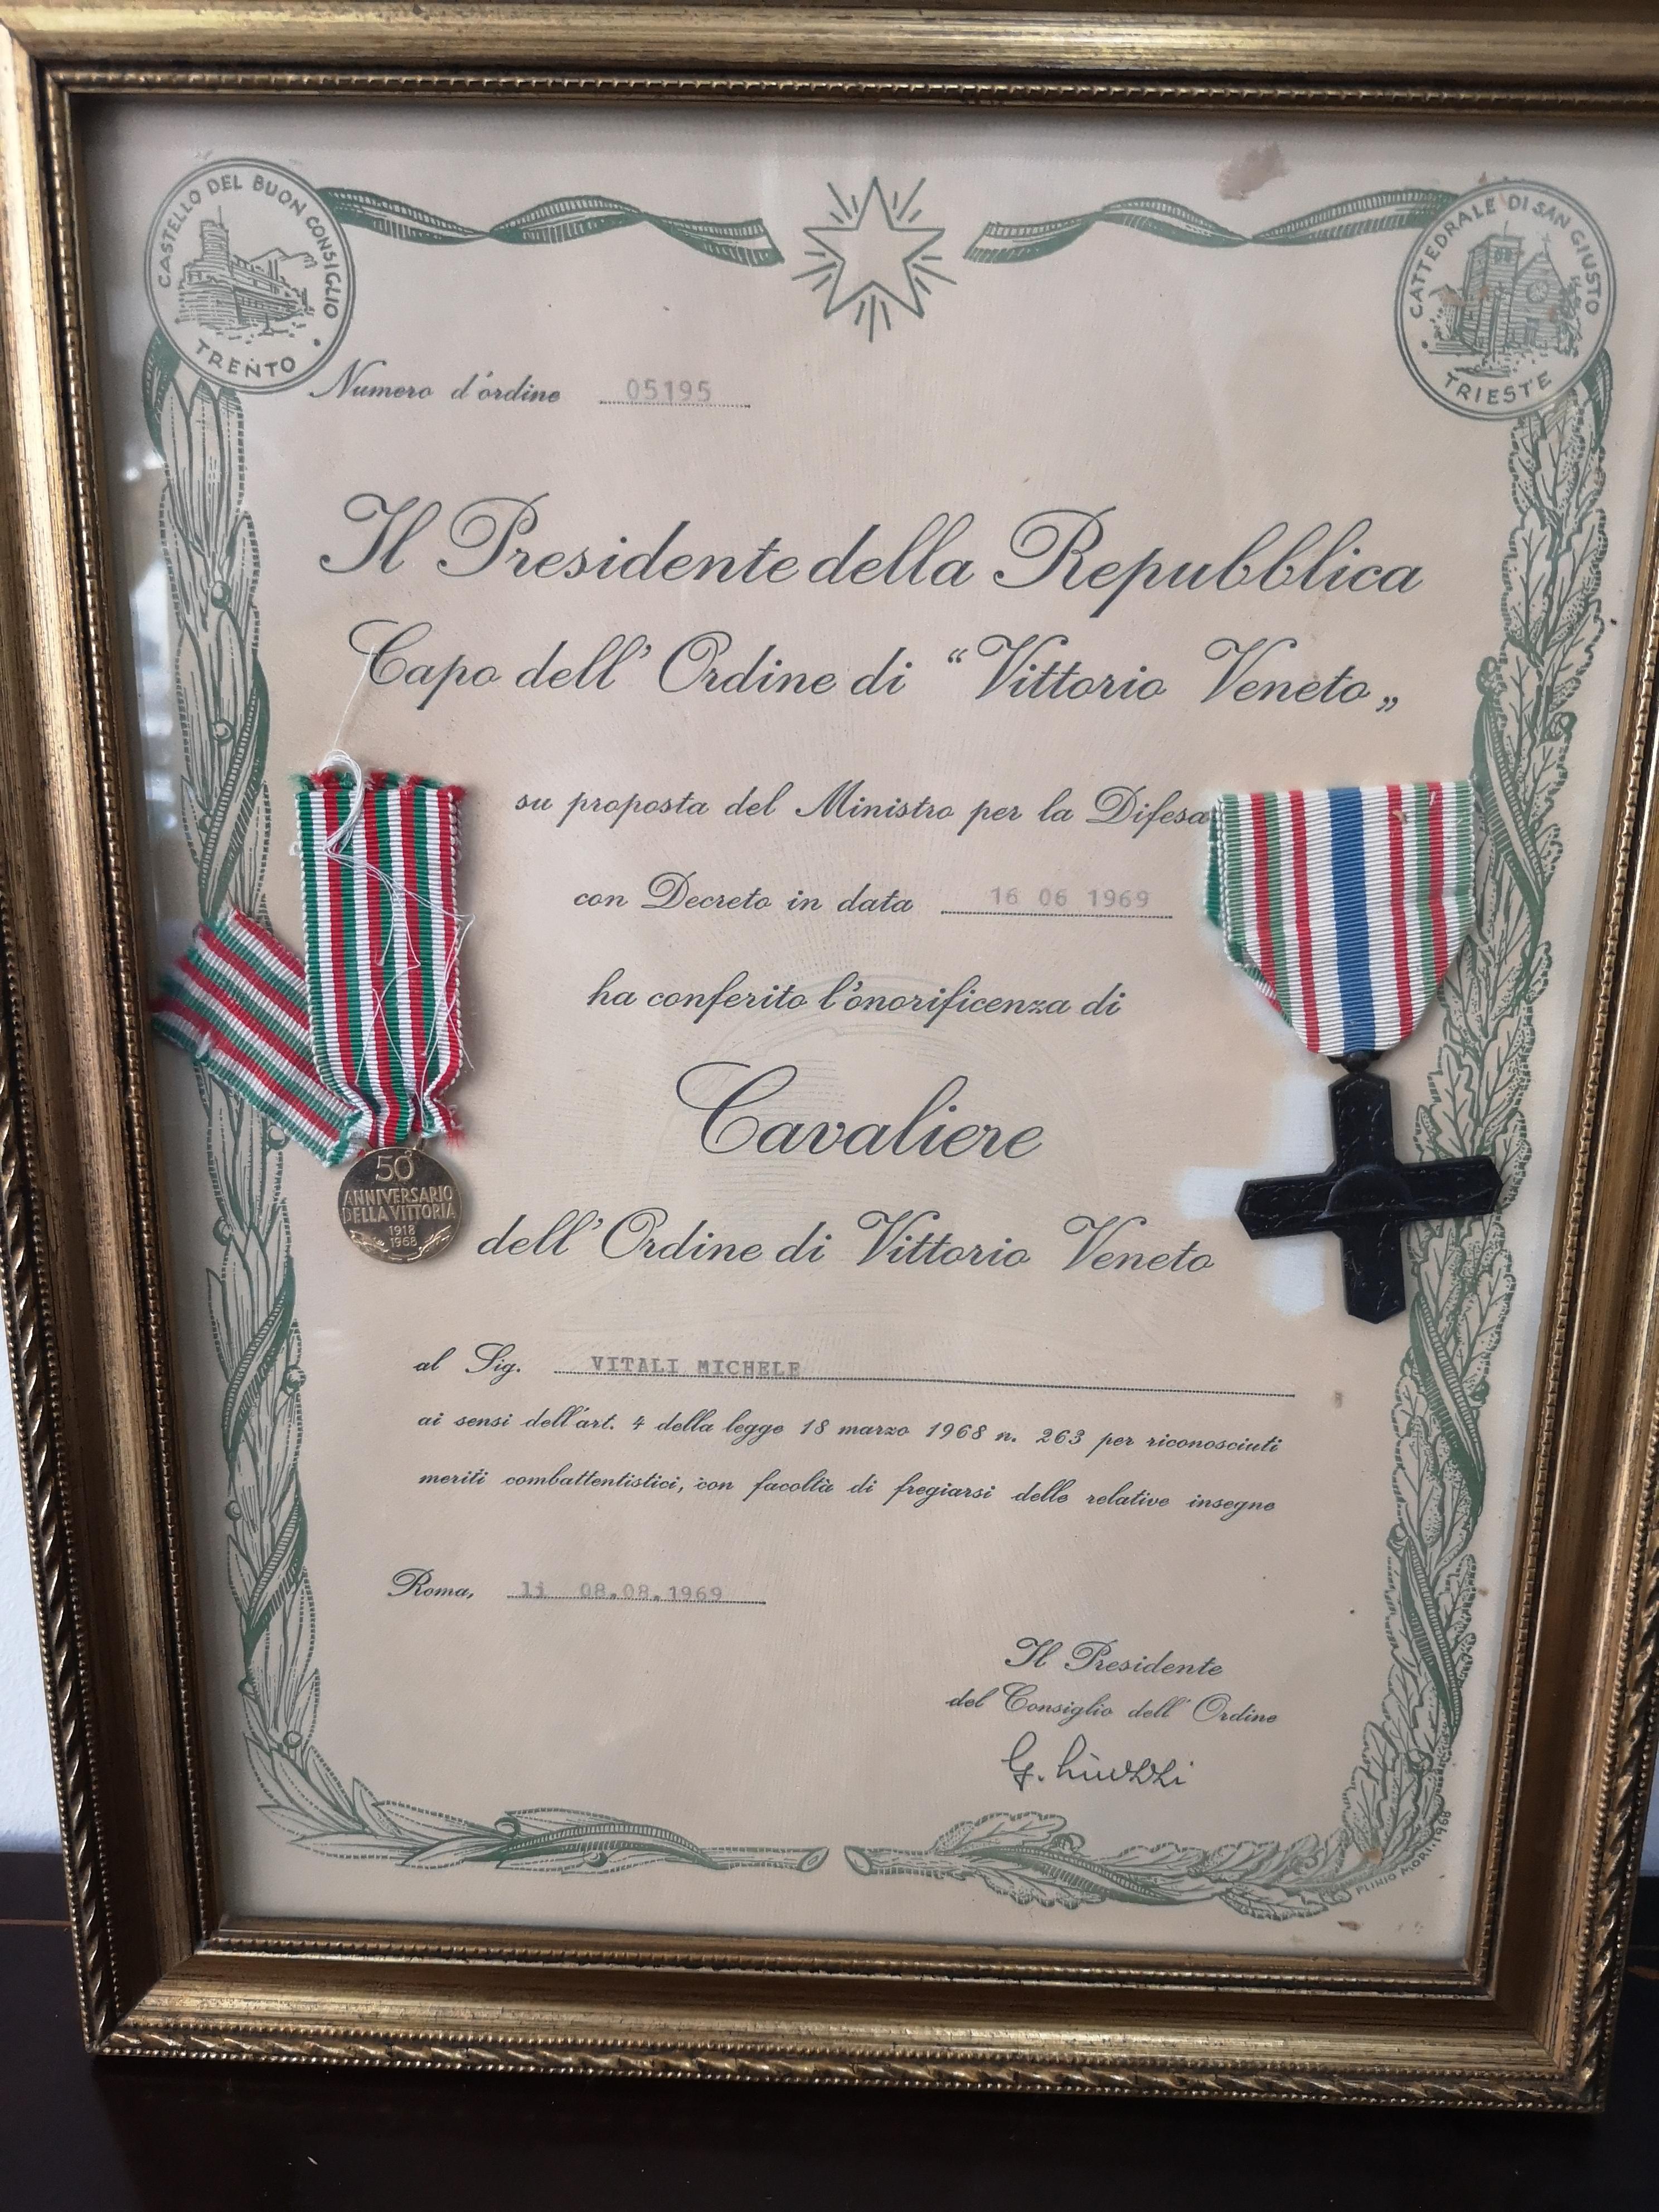 Honored Knight of the Order of Vittorio Veneto
framed with two medals.
An 18 kt gold 750 medal  - 50th Anniversary of Victory
and the other medal Cross of the Order of Vittorio Veneto
The frame measures 35 x 27 cm